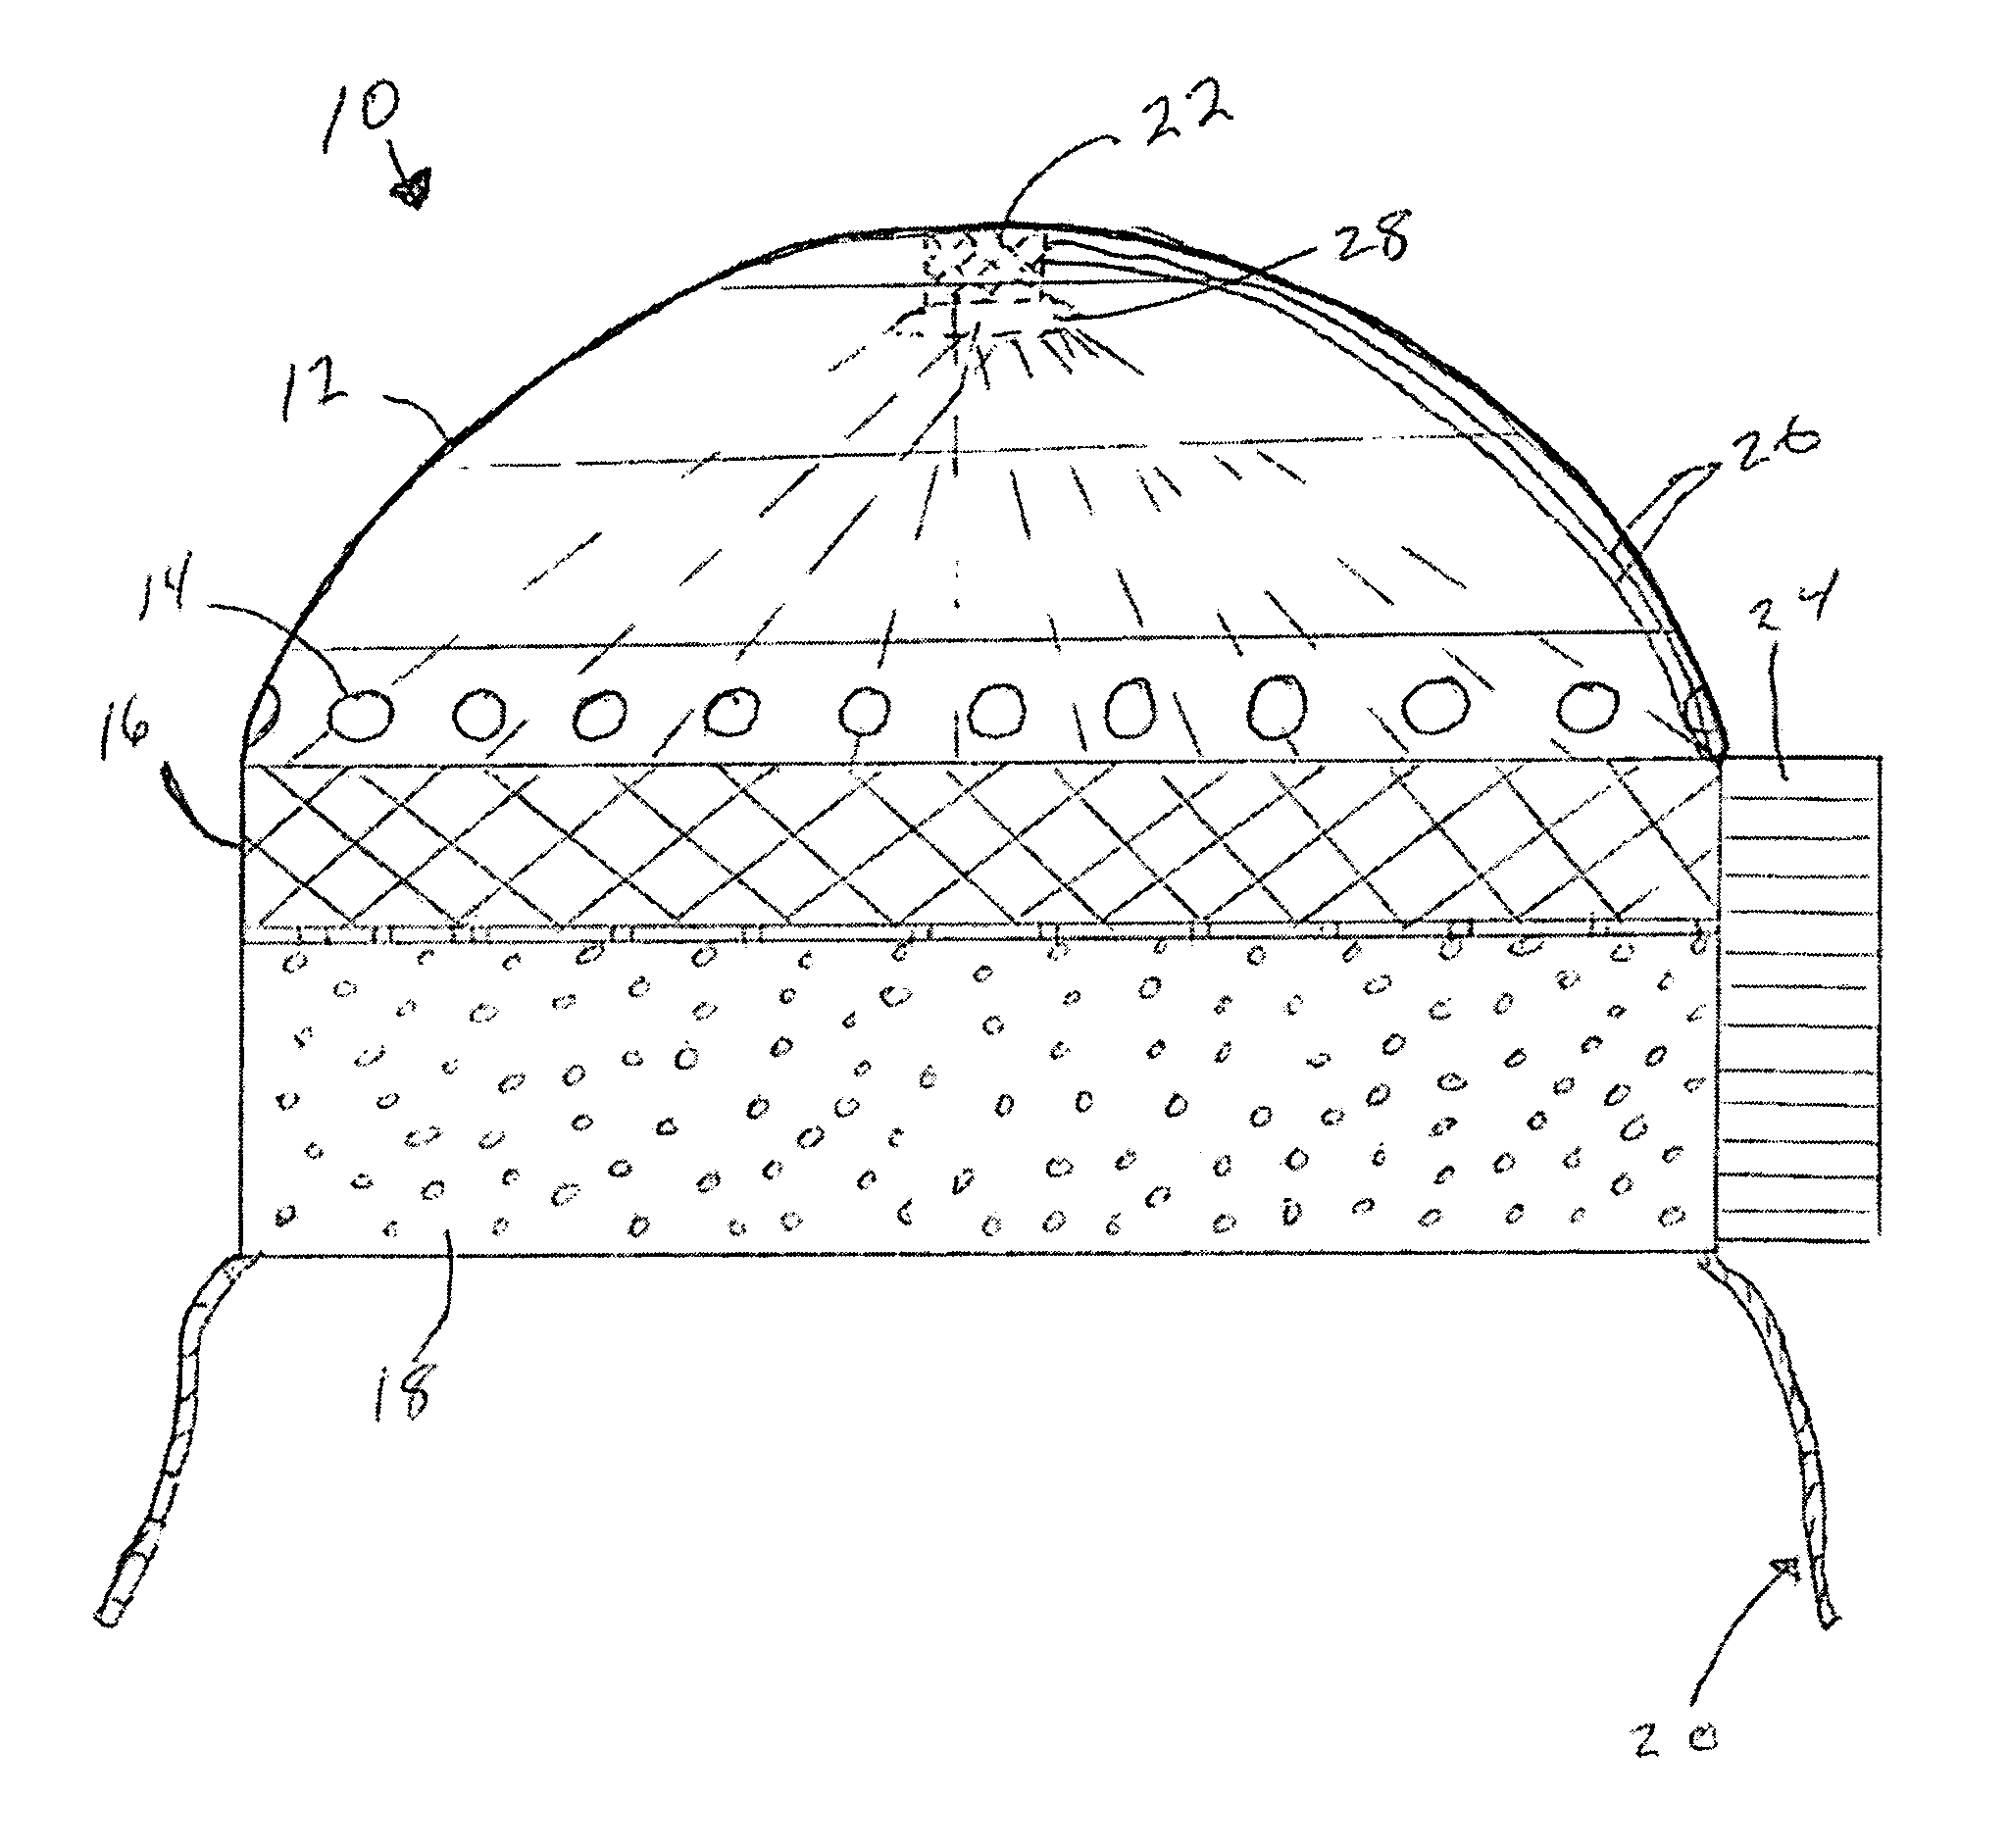 Light-mediated air purification system and method